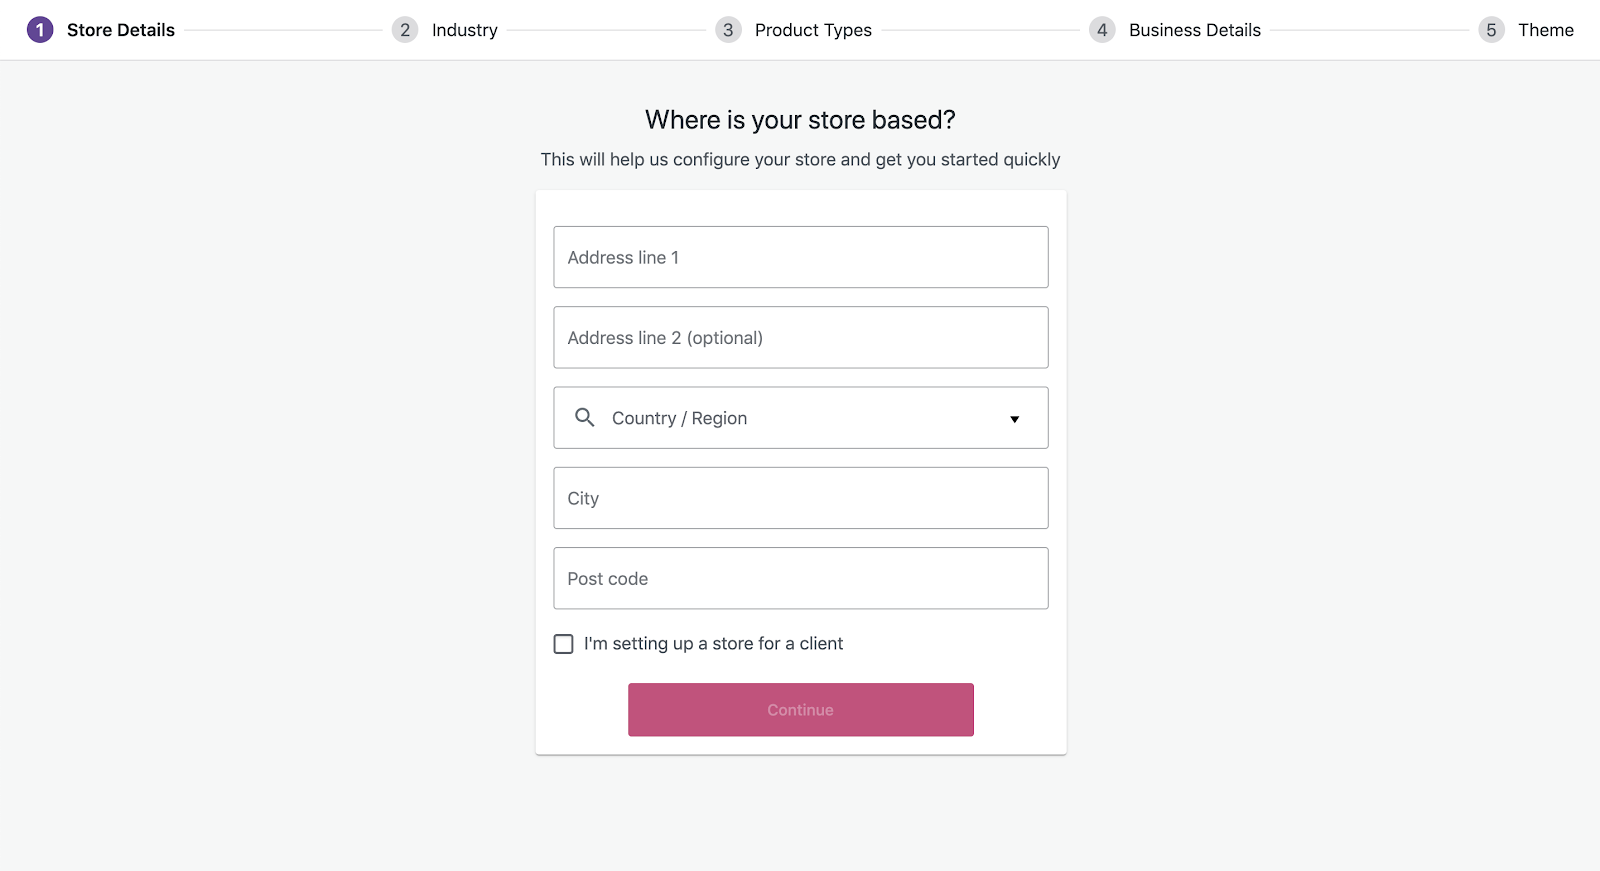 How to set up a WooCommerce store step-by-step?